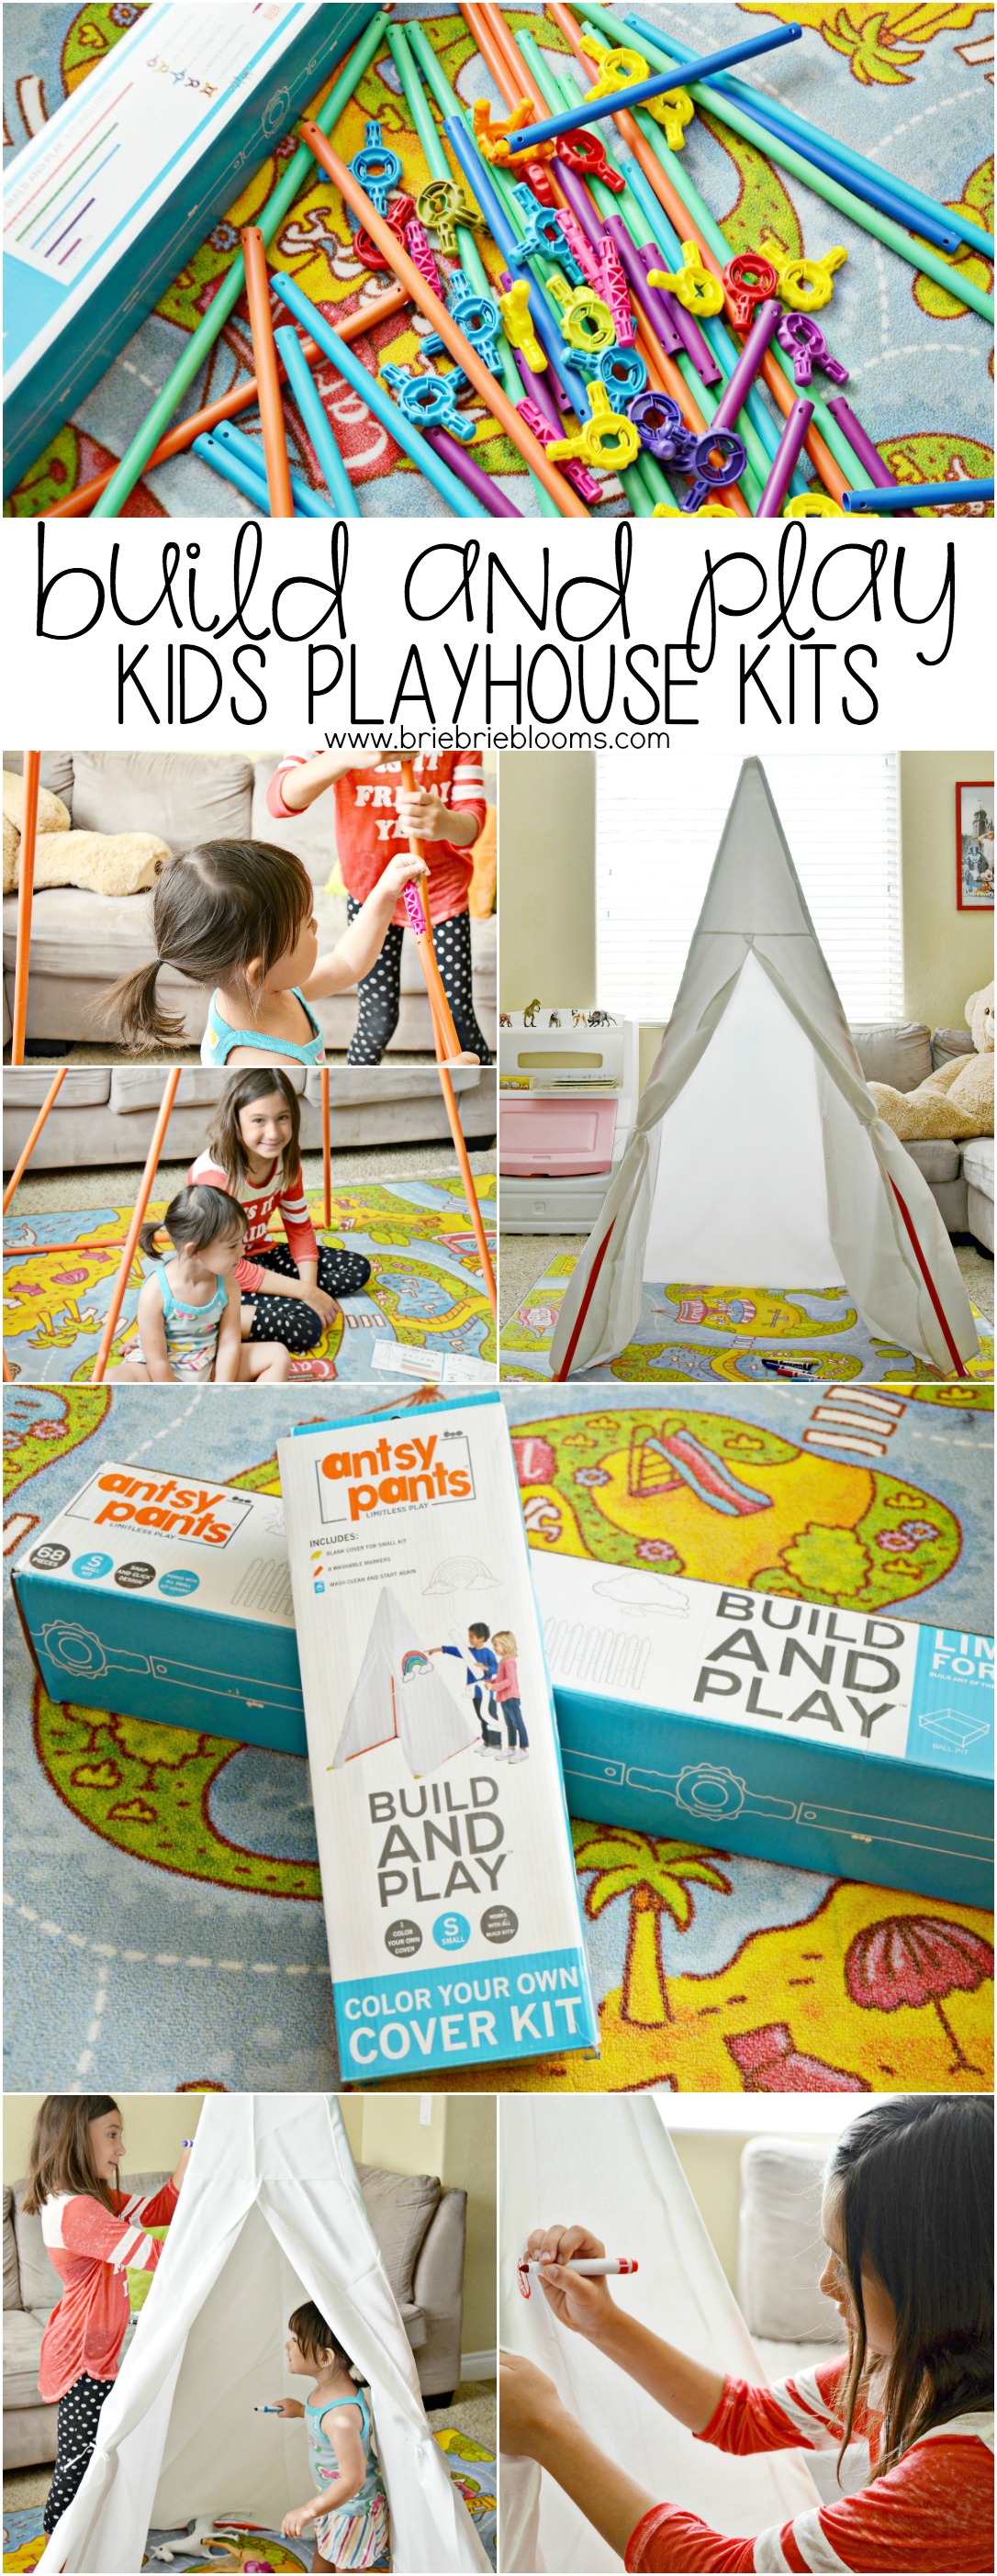 Antsy Pants kids playhouse kits are exclusively available at Target and provide endless opportunities for creating, imagining and building together.